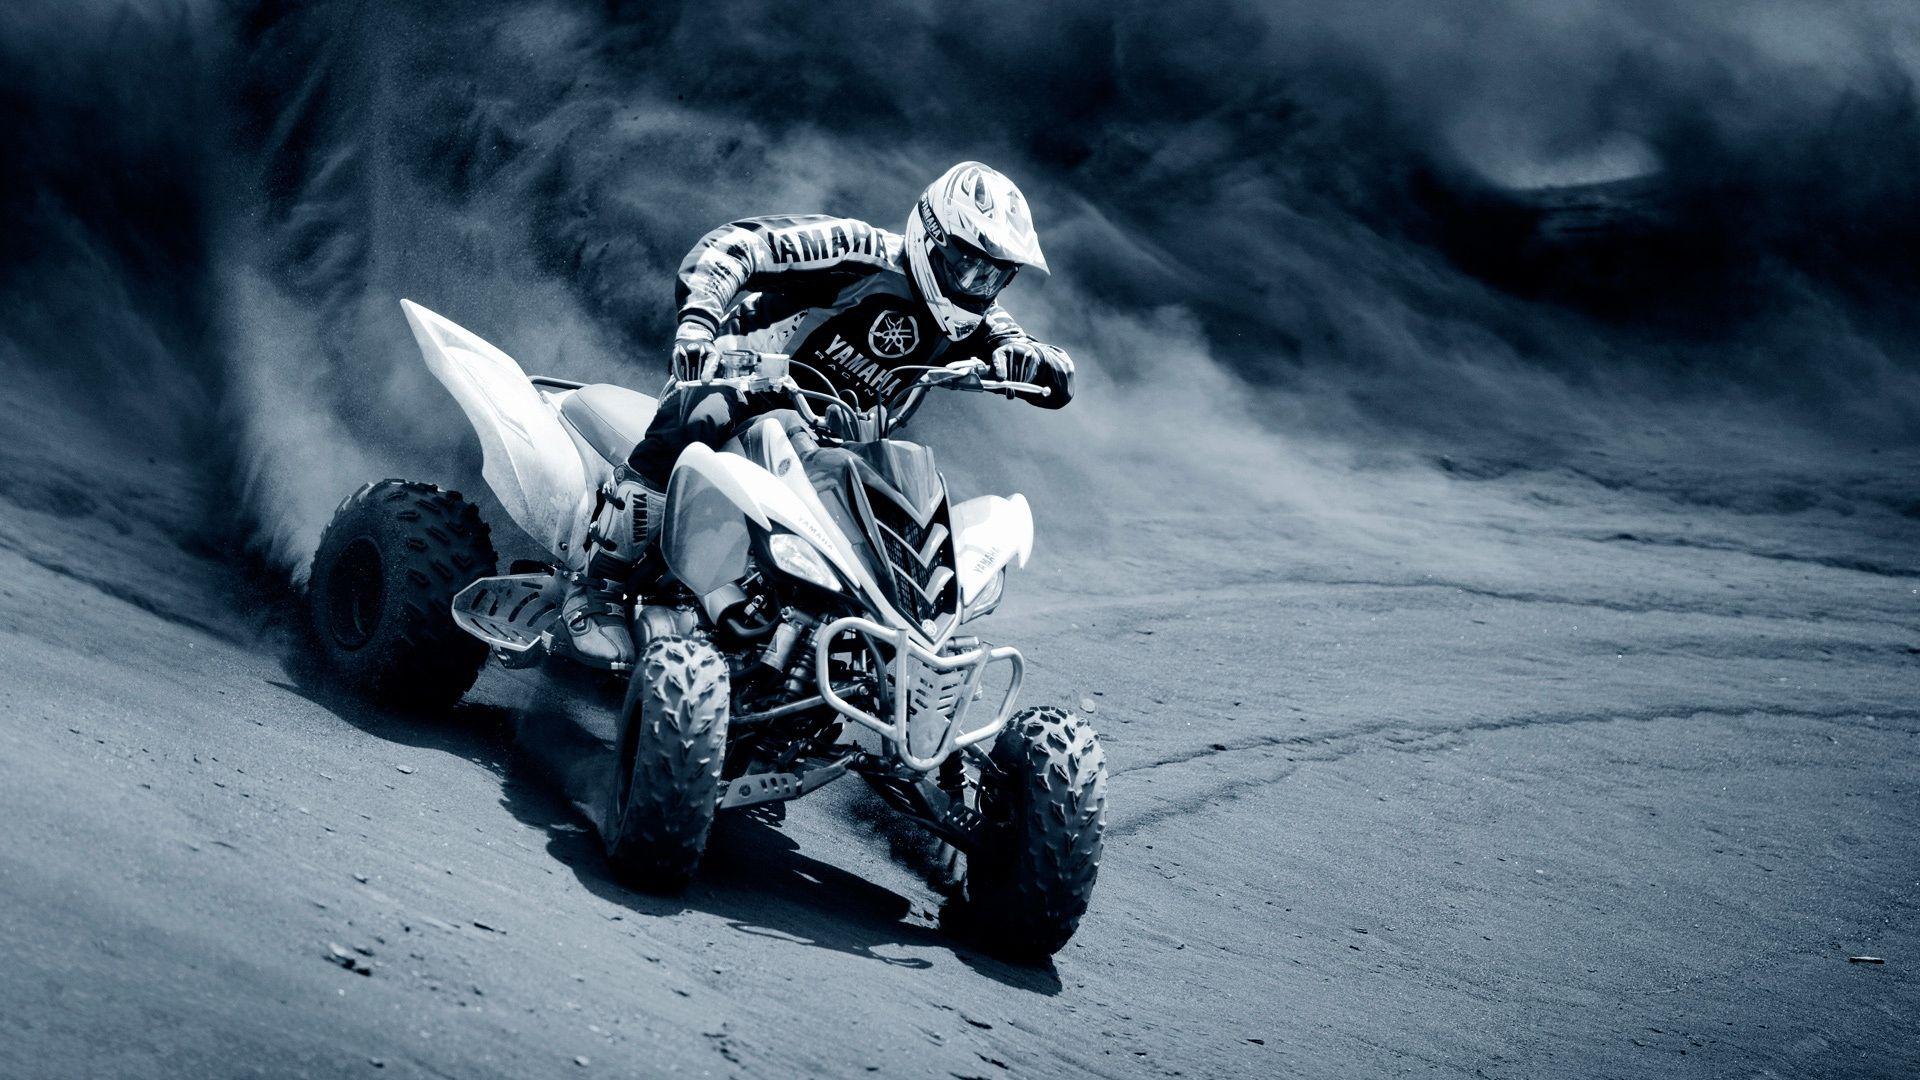 Quad Bike Sport HD wallpaper is 1.37 Mb in size (original file is 1920x1080) and was downloaded 9 times. It was downloaded 12.3. Квадроцикл, Автомобили, Велосипед